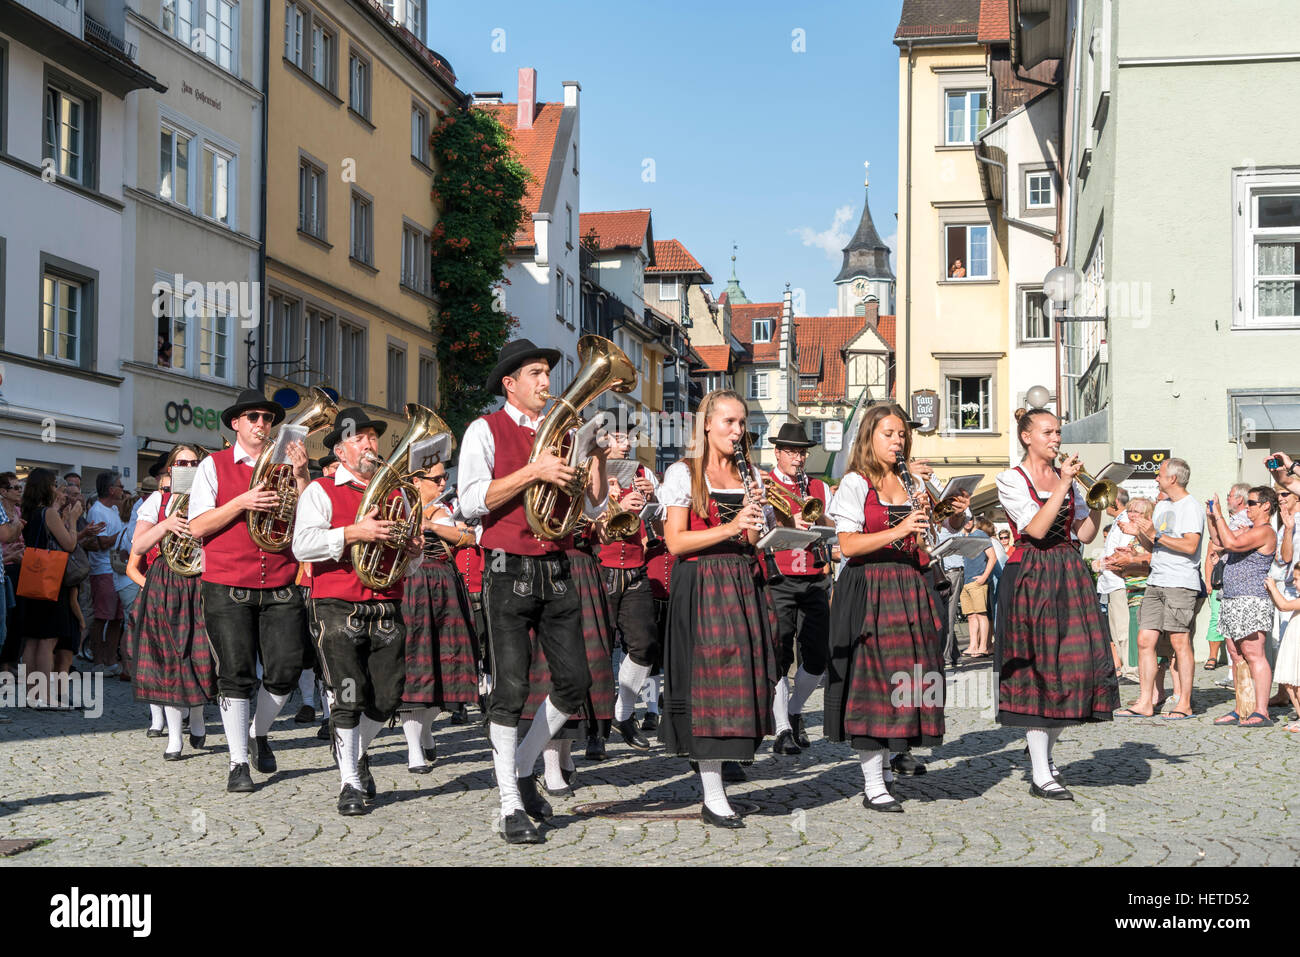 Parade with musical band in traditional costumes, Lindau, Lake Constance, Bavaria, Germany, Europe Stock Photo